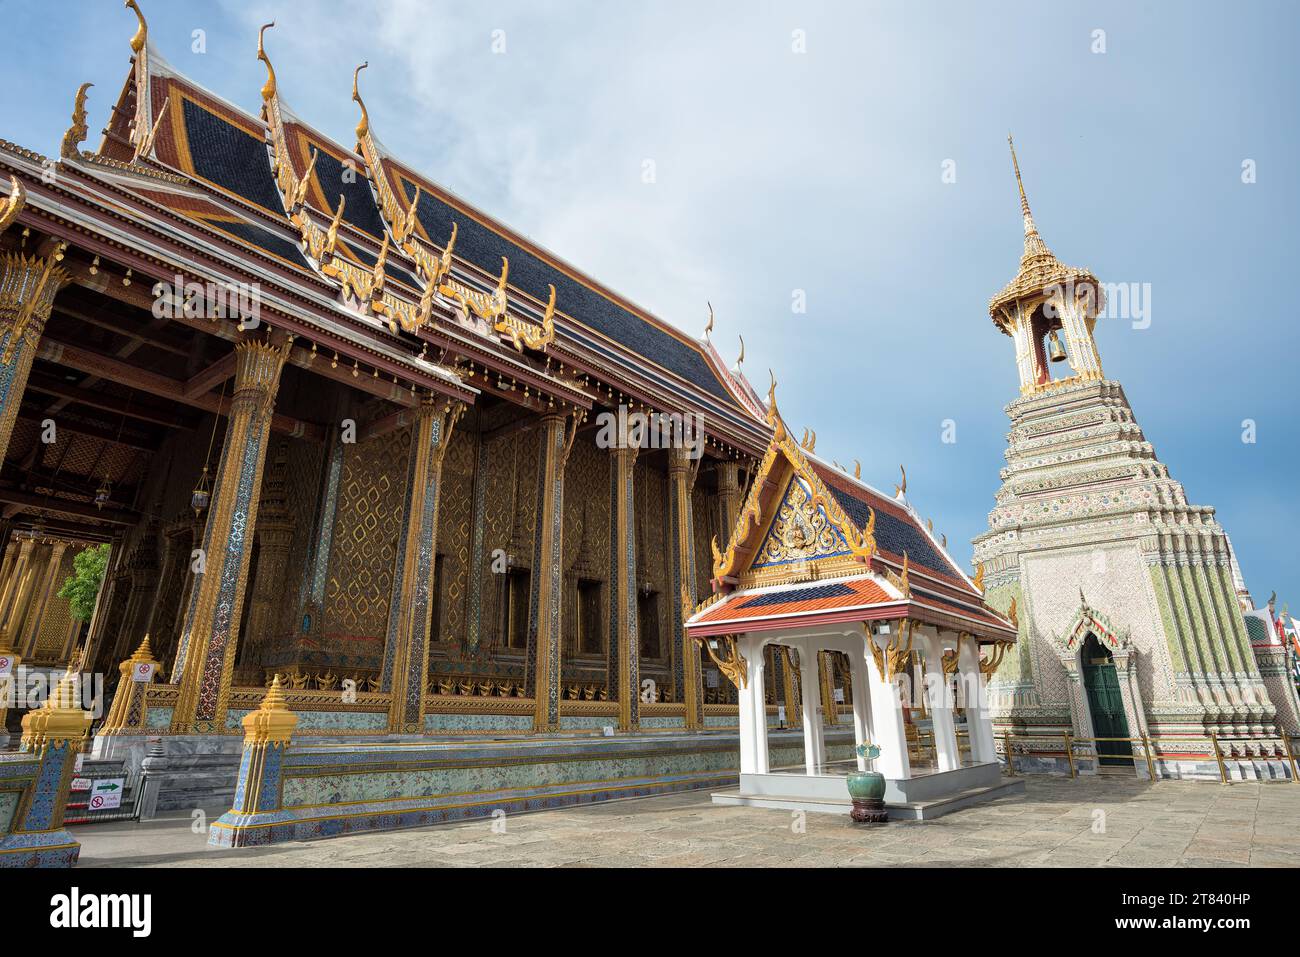 The artistic architecture and decoration of Phra Ubosot or The Chapel of The Emerald Buddha or Wat Phra Kaew, The Grand Palace, Thailand - The main Ph Stock Photo